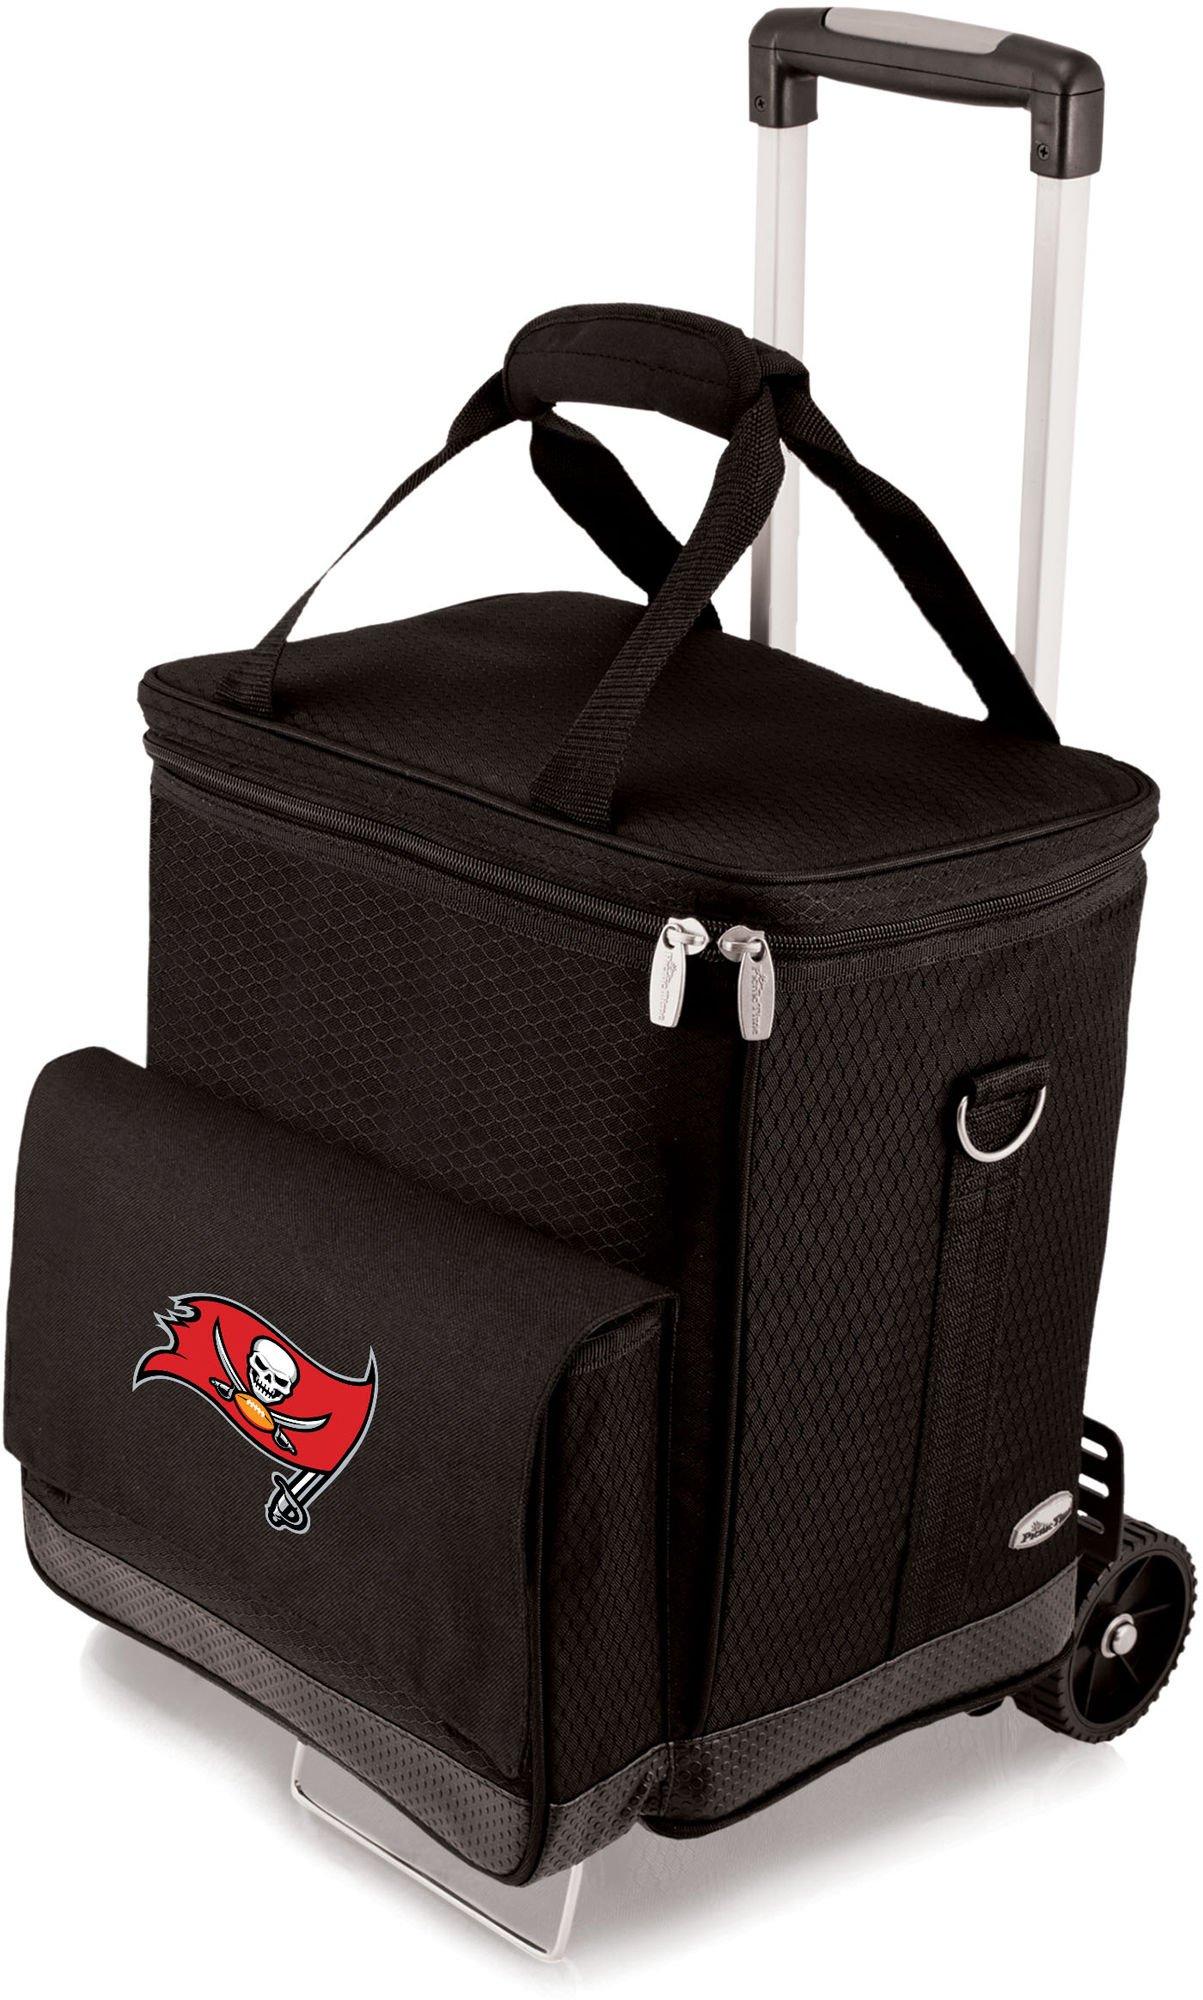 Tampa Bay Buccaneers 6 Bottle Wine Tote by